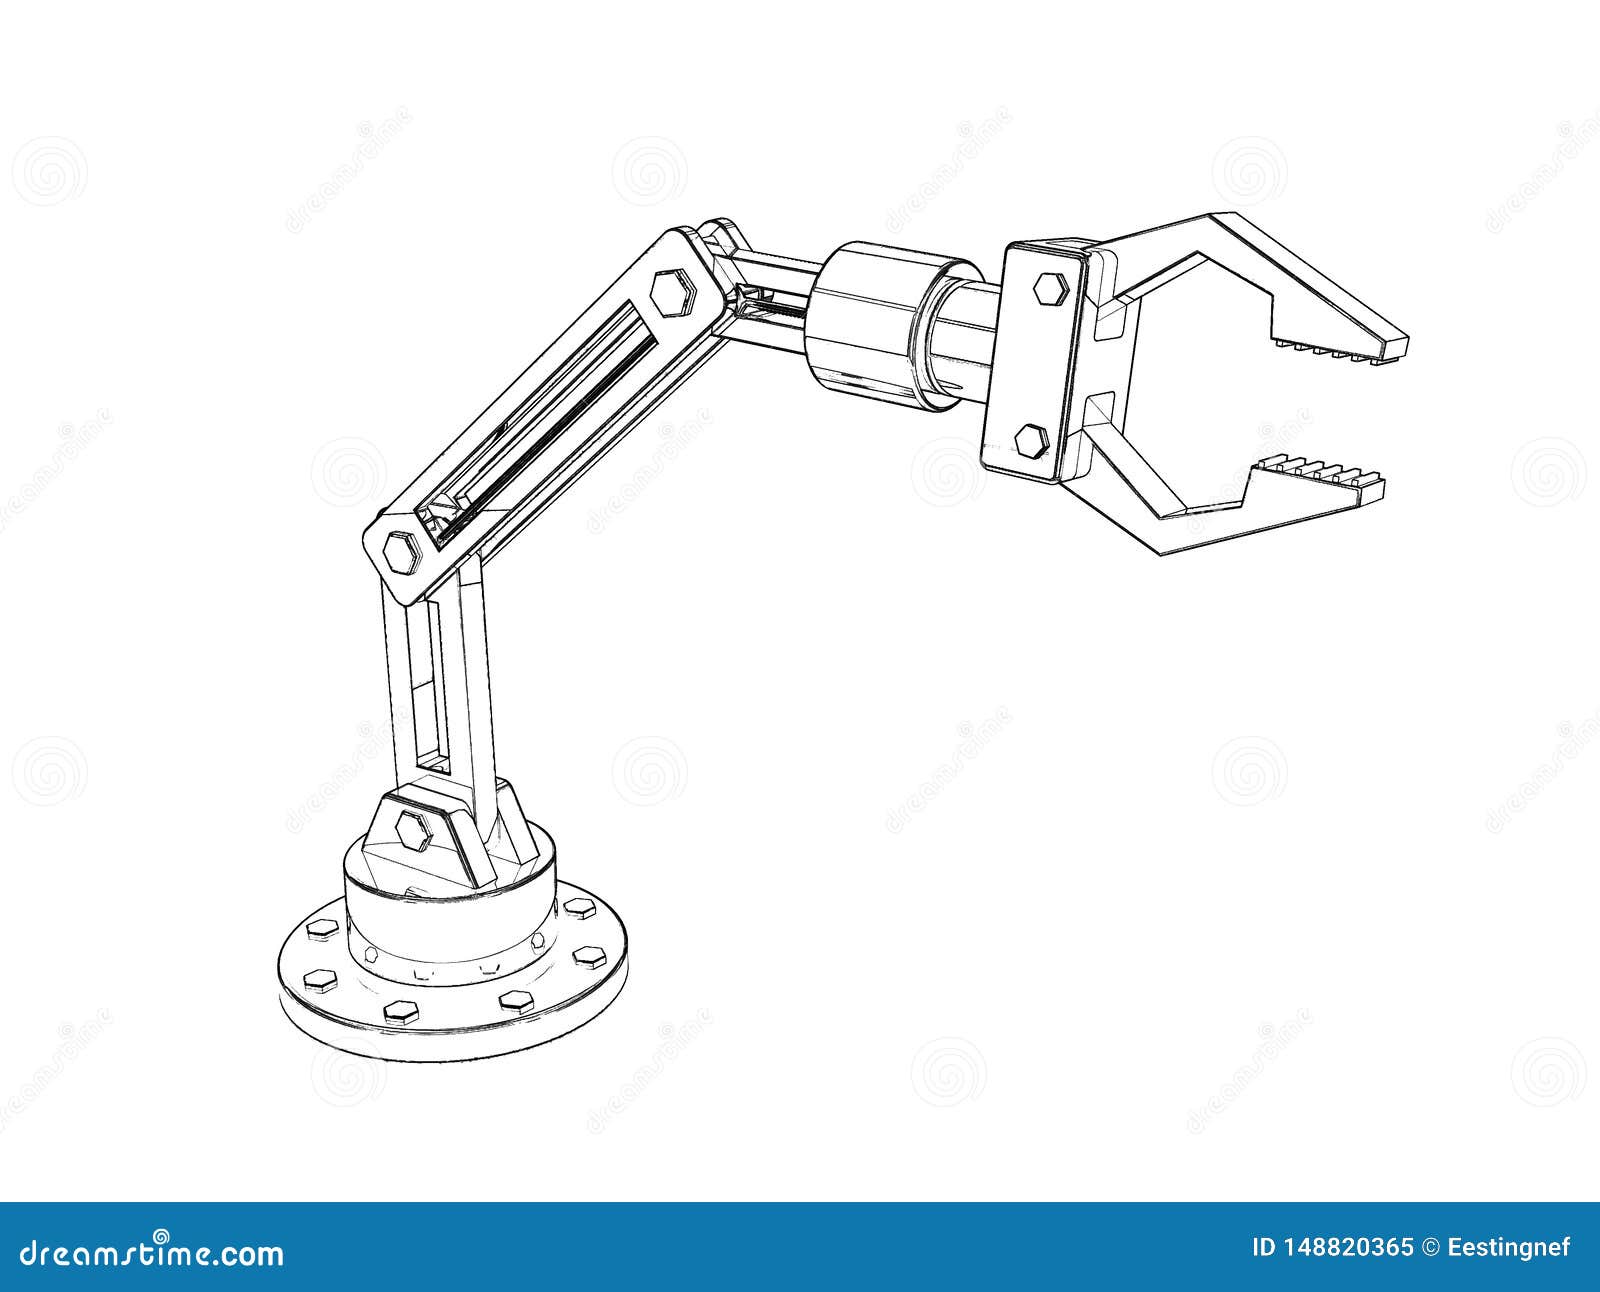 Robotic Arm. Isolated on White Background. Sketch Illustration Stock